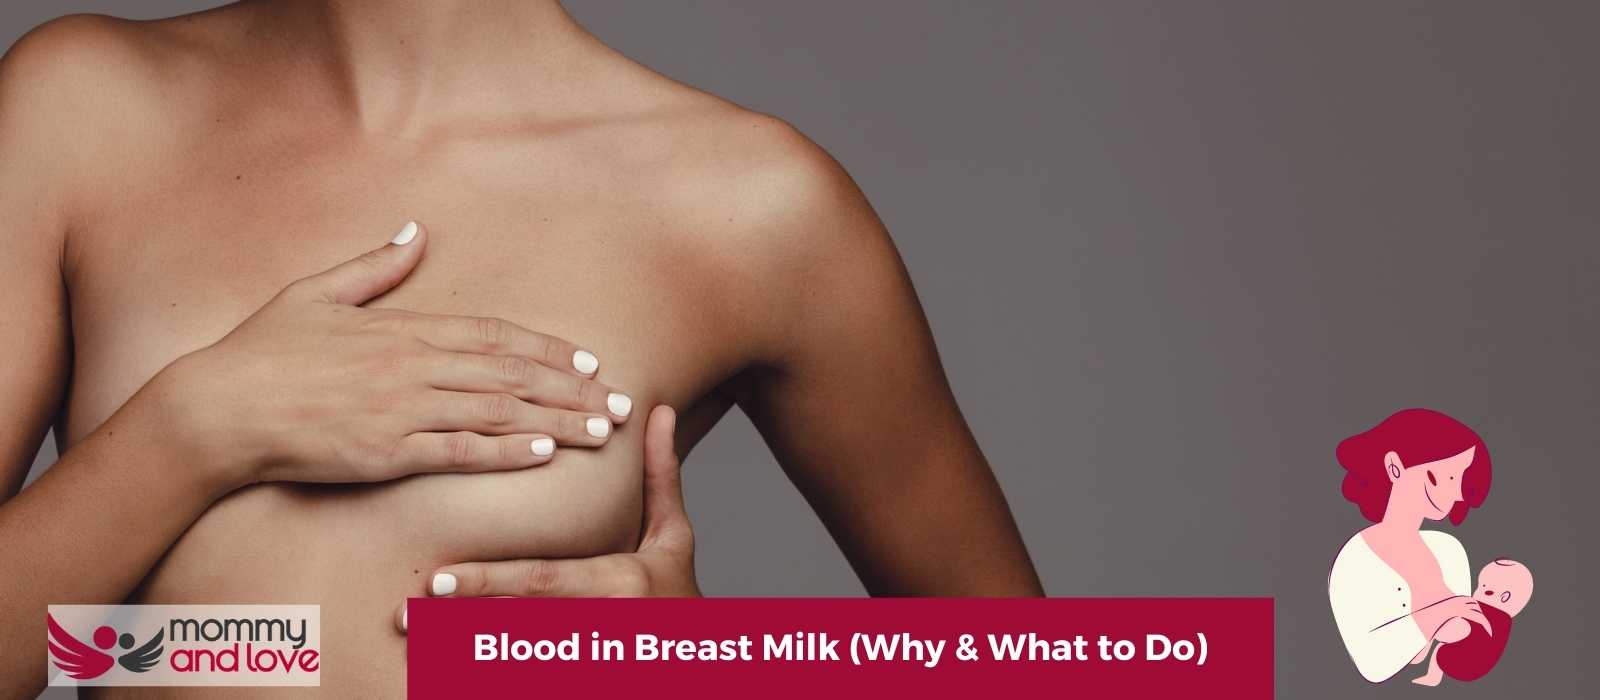 Blood in Breast Milk (Why & What to Do)